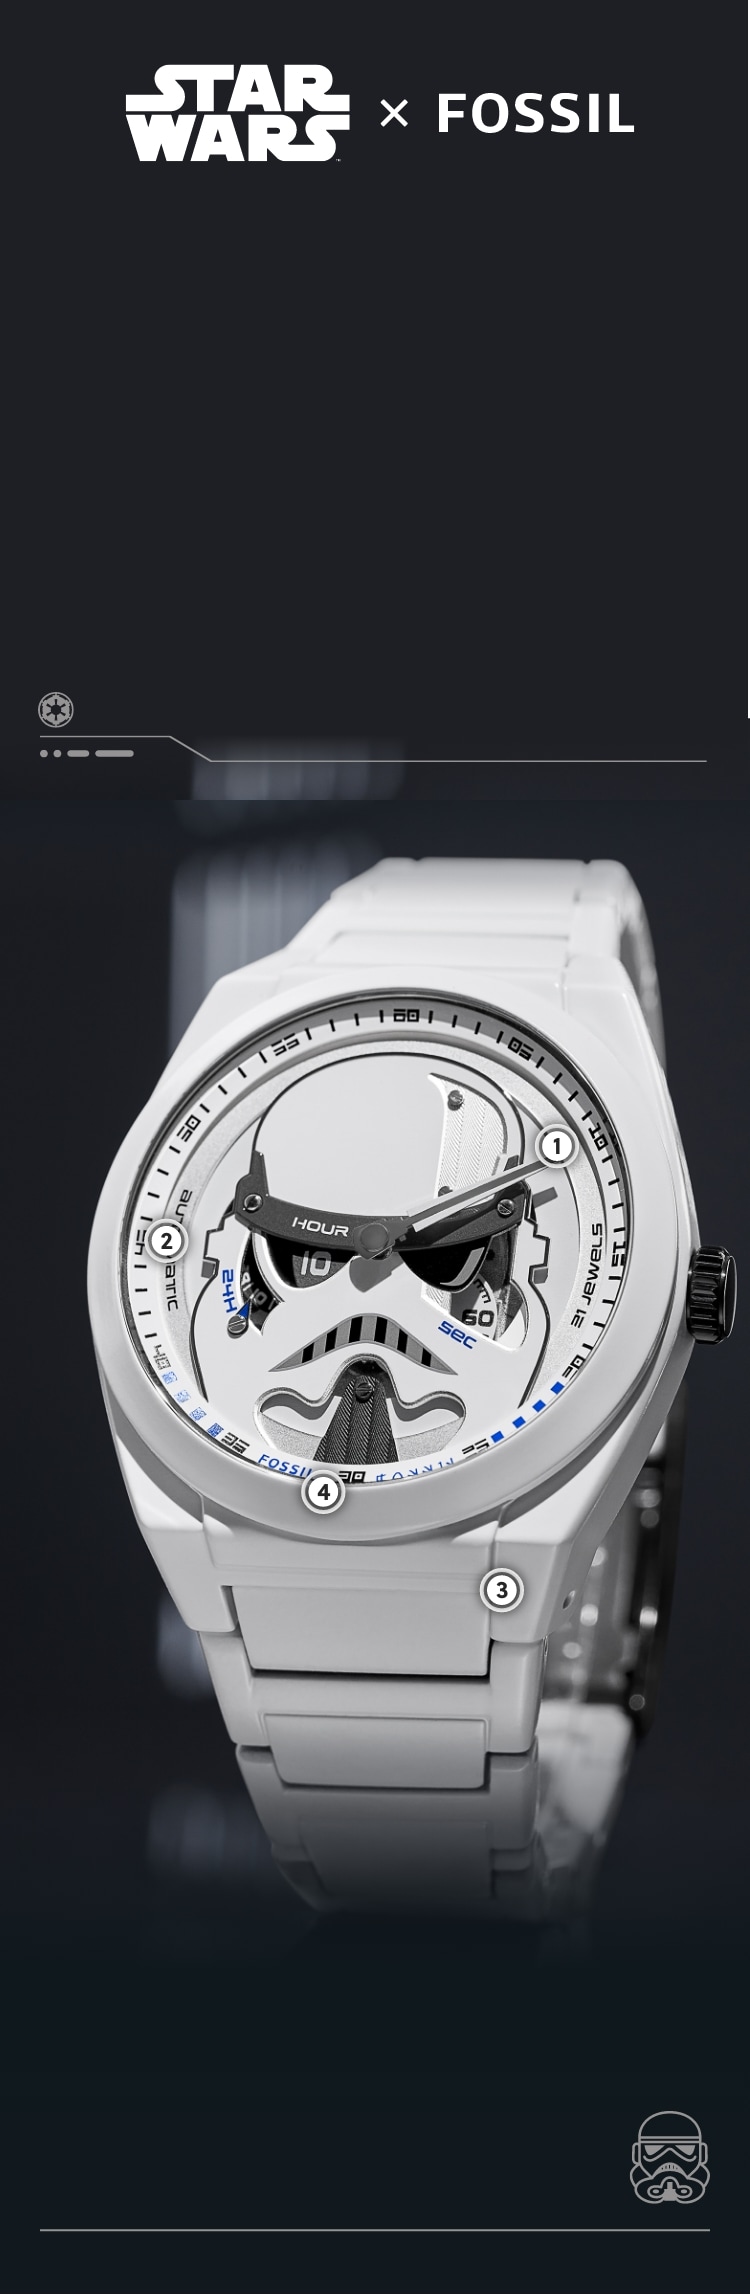 A close up of a white resin-coated watch with a dimensional stormtrooper helmet on a white dial.